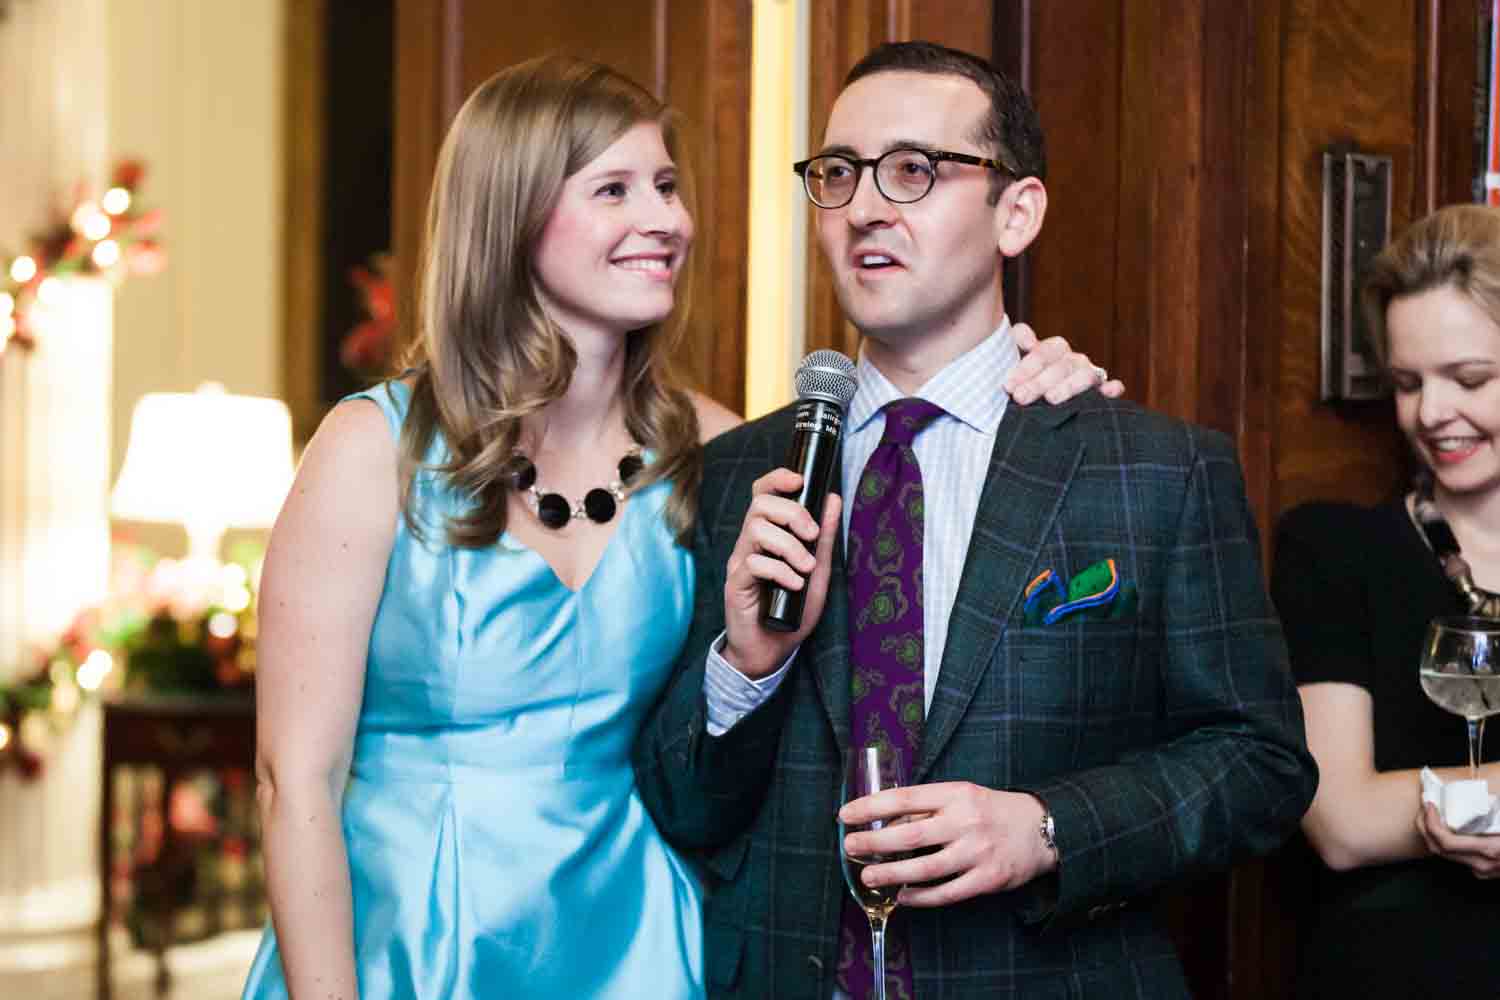 Man speaking into microphone and woman wearing blue dress at a Lotos Club engagement party